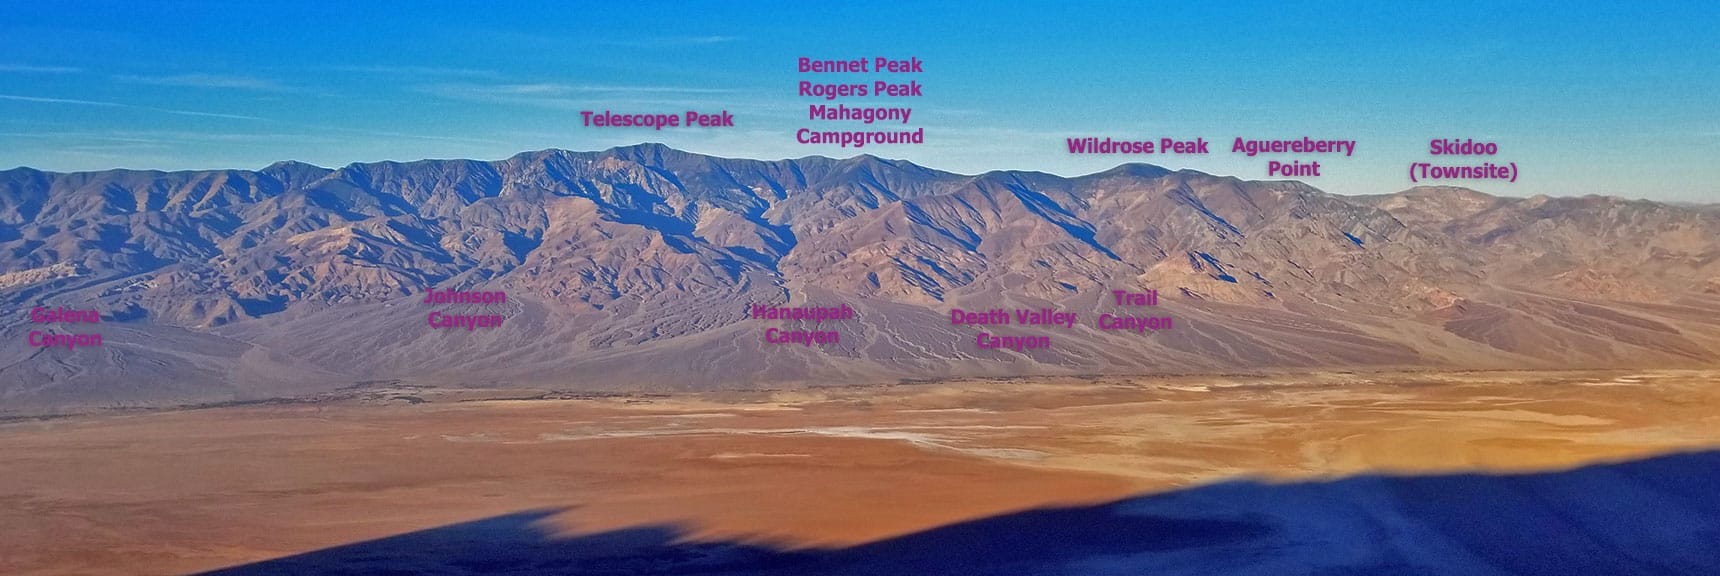 Features in the Panamint Range from Dante's View Area | Dante's View to Mt. Perry | Death Valley National Park, CA